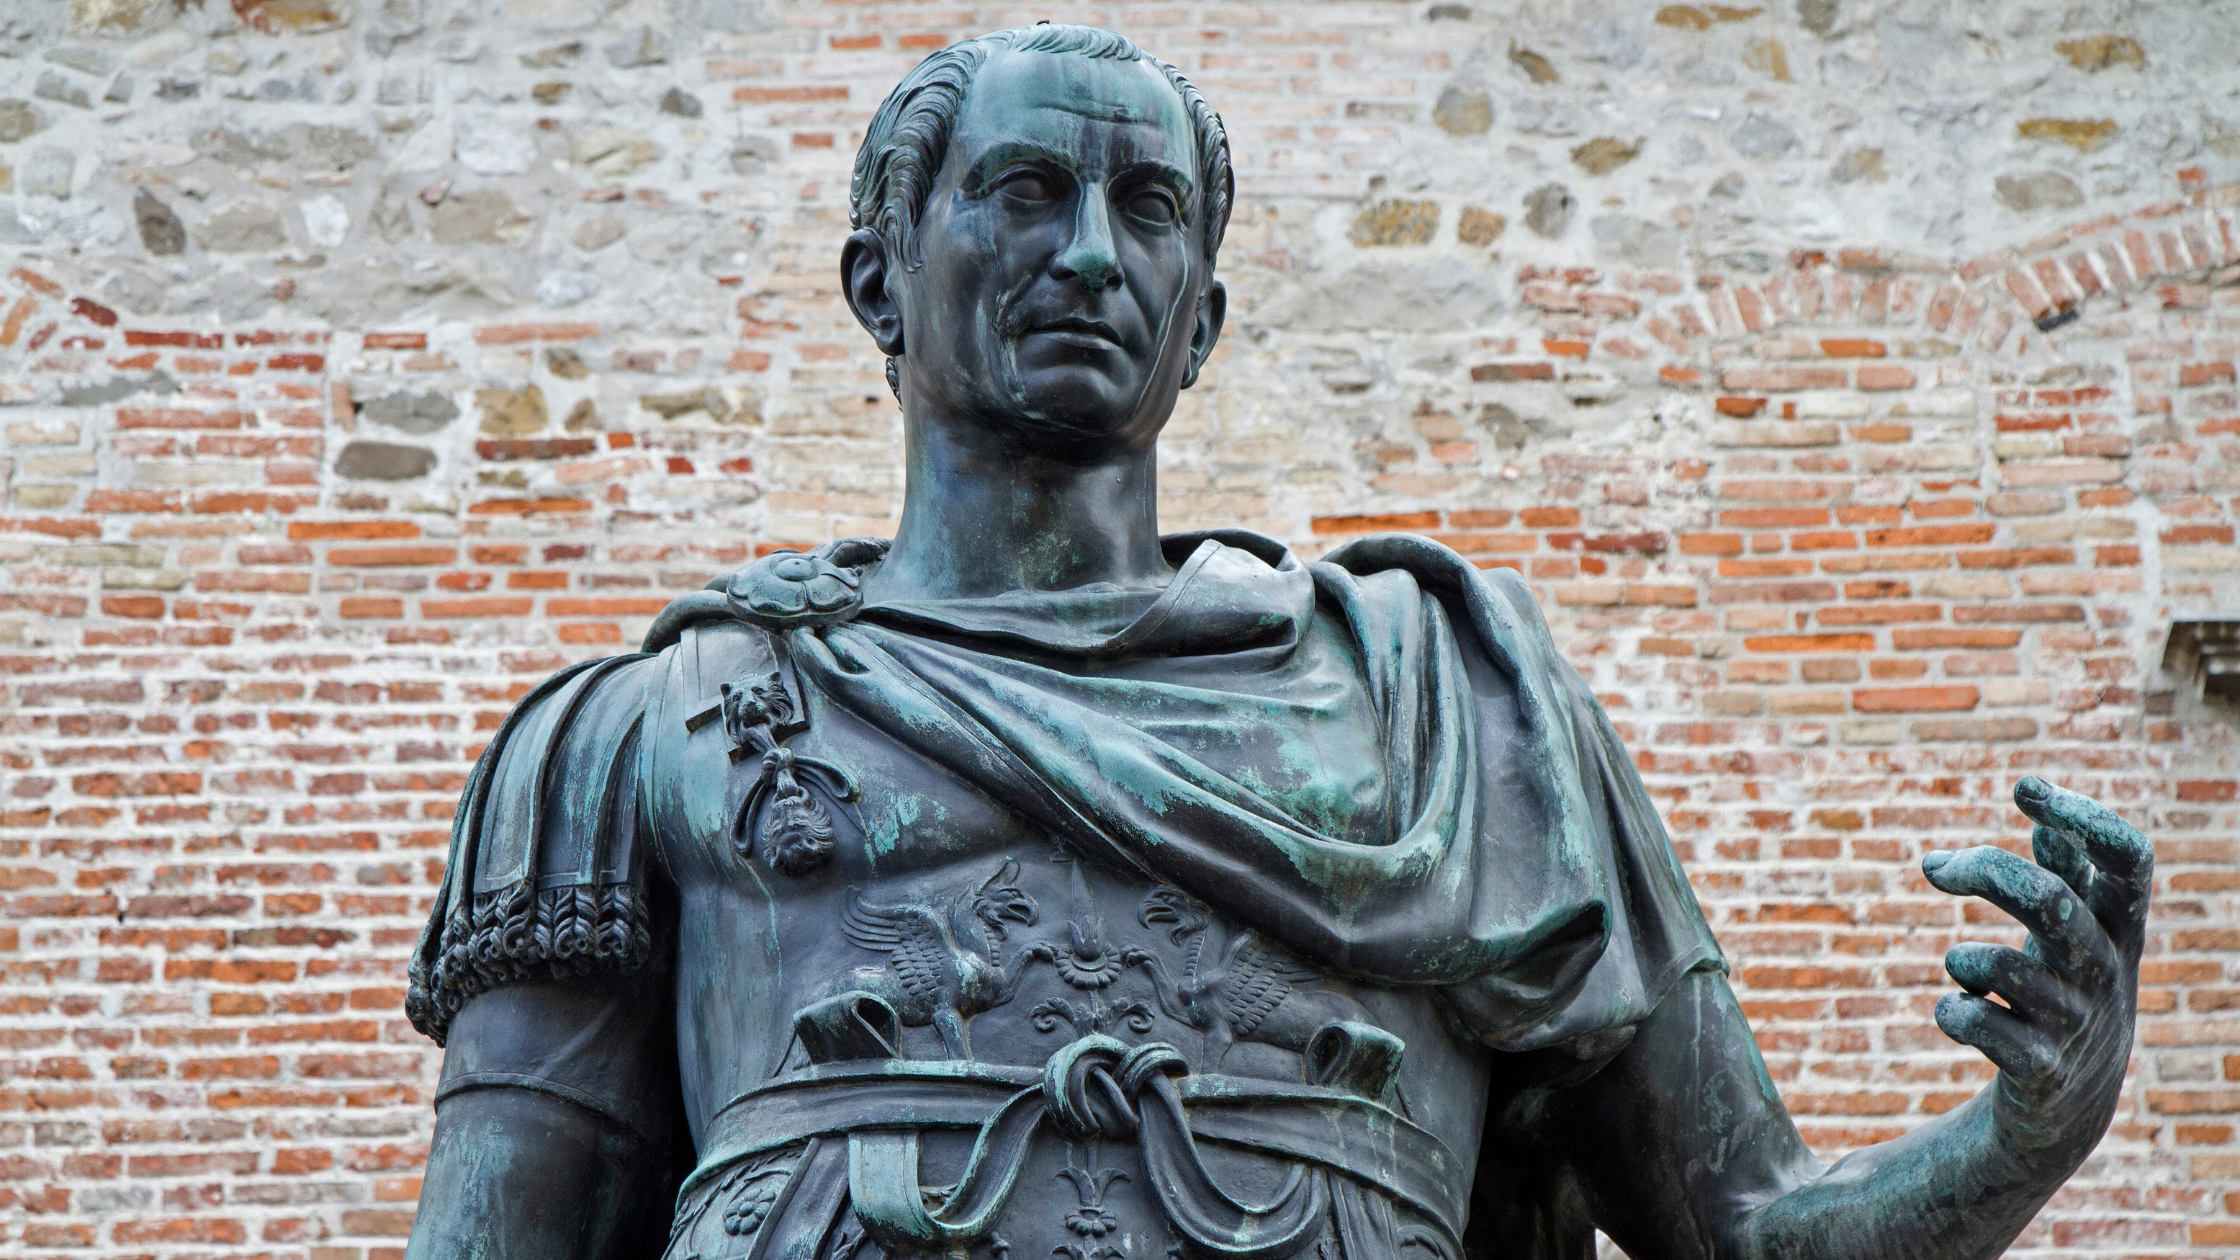 The Ides of March: How did Julius Caesar die? featured image